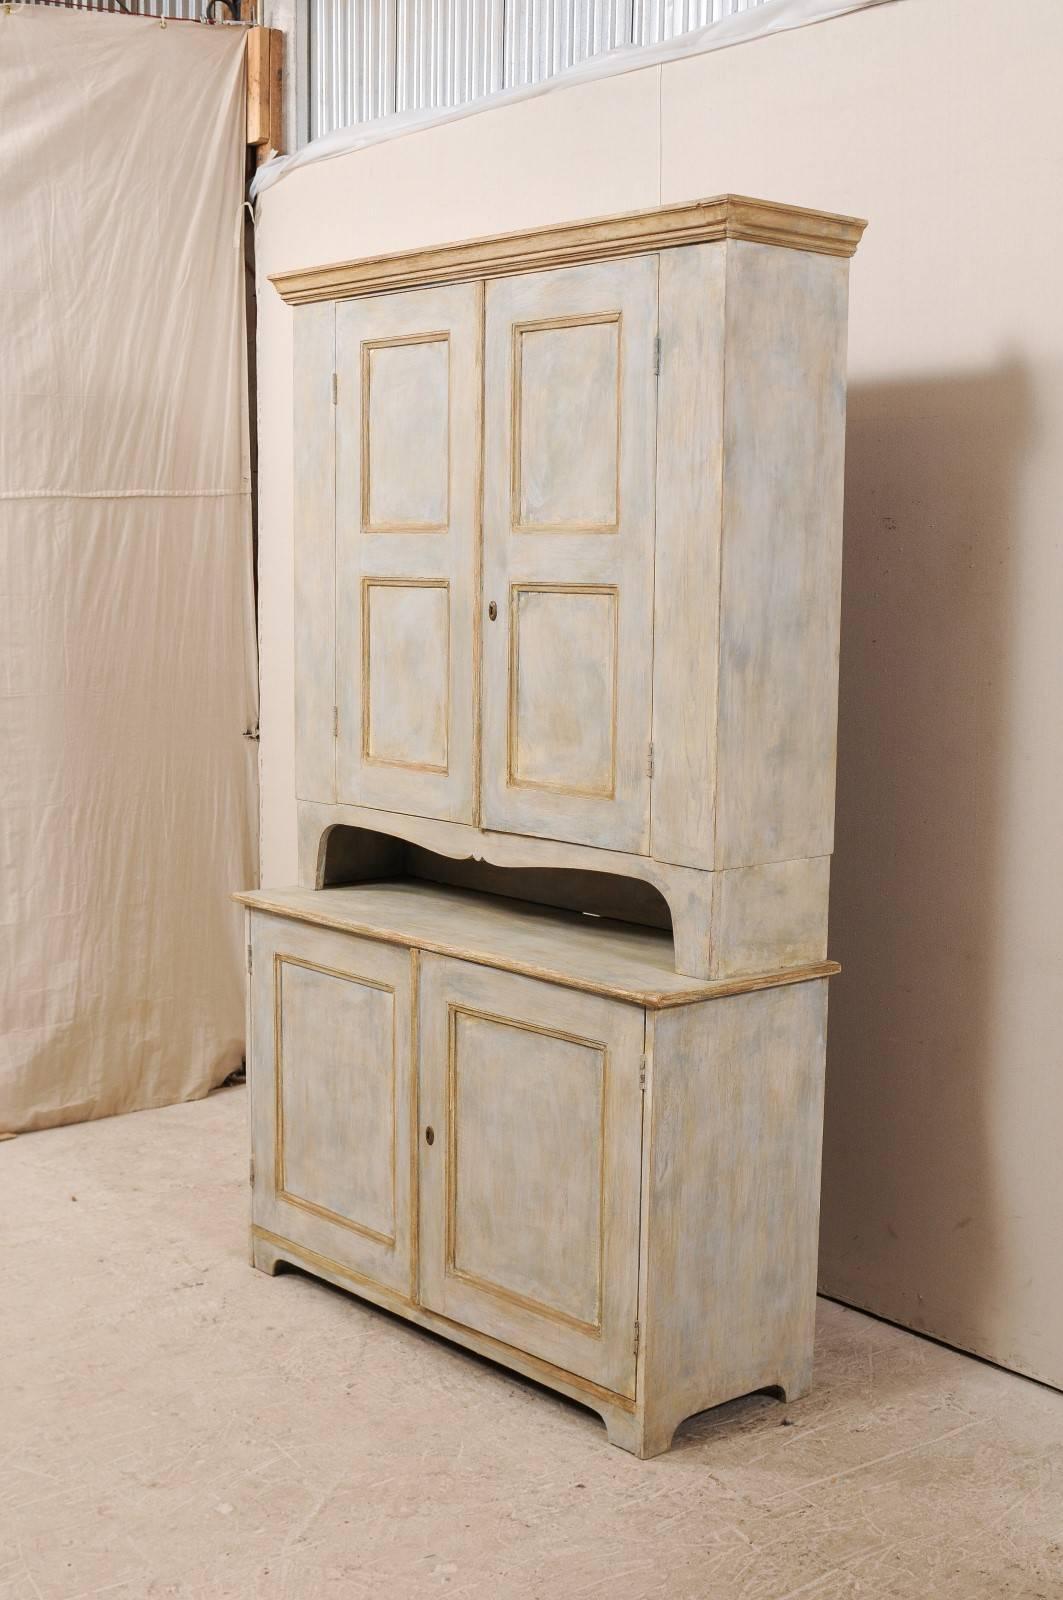 Swedish Mid-19th Century Painted Wood Cabinet with Ample Shelves and Storage For Sale 4